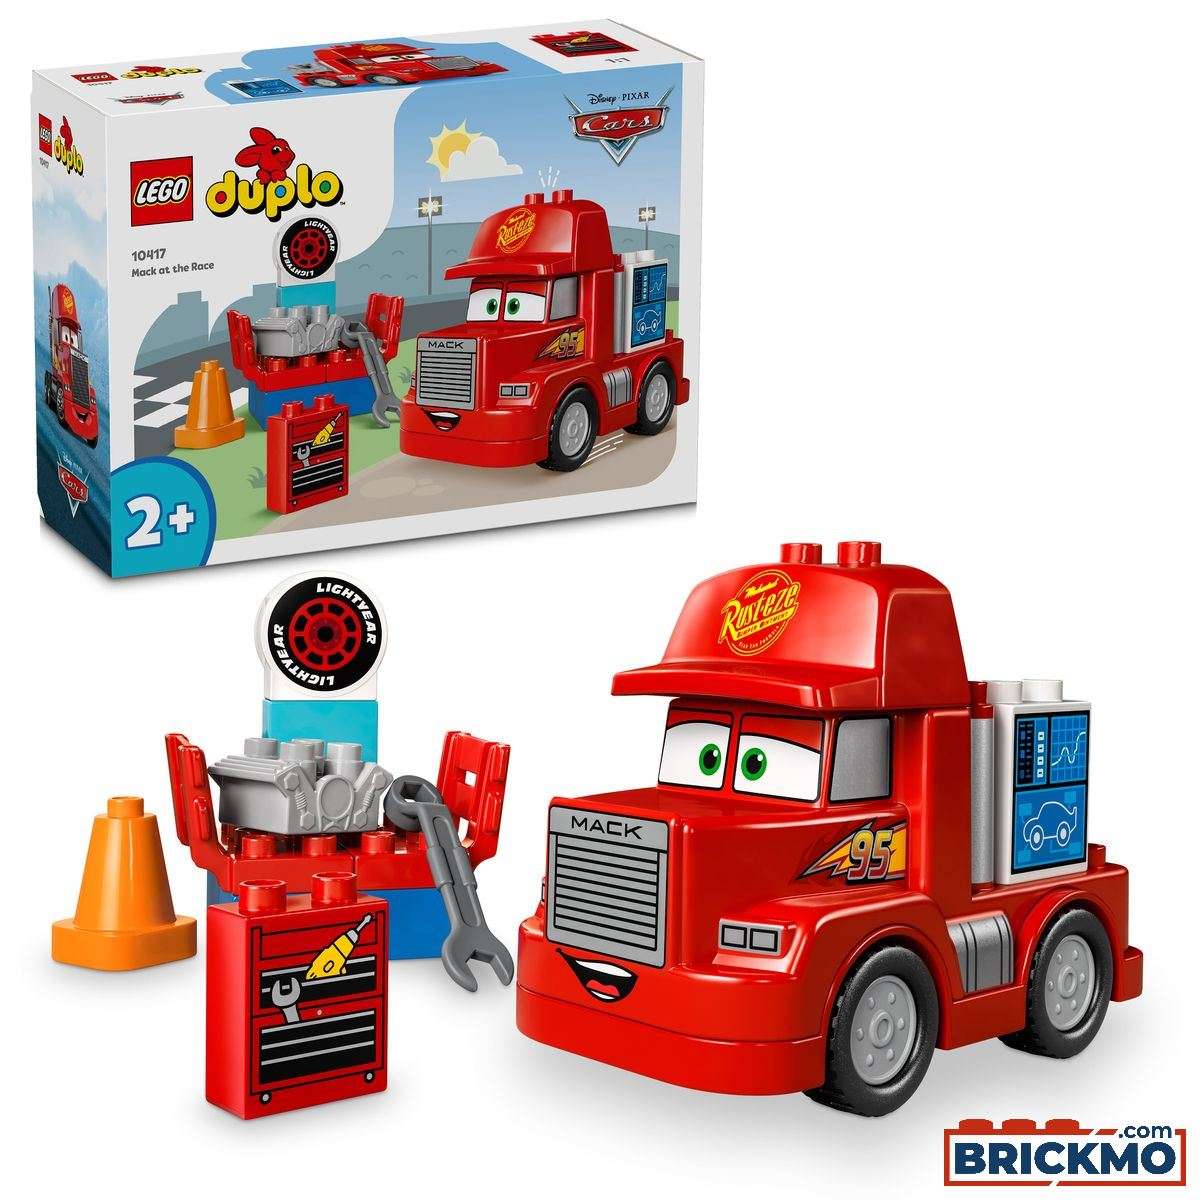 LEGO Duplo 10417 Mack at the Race 10417